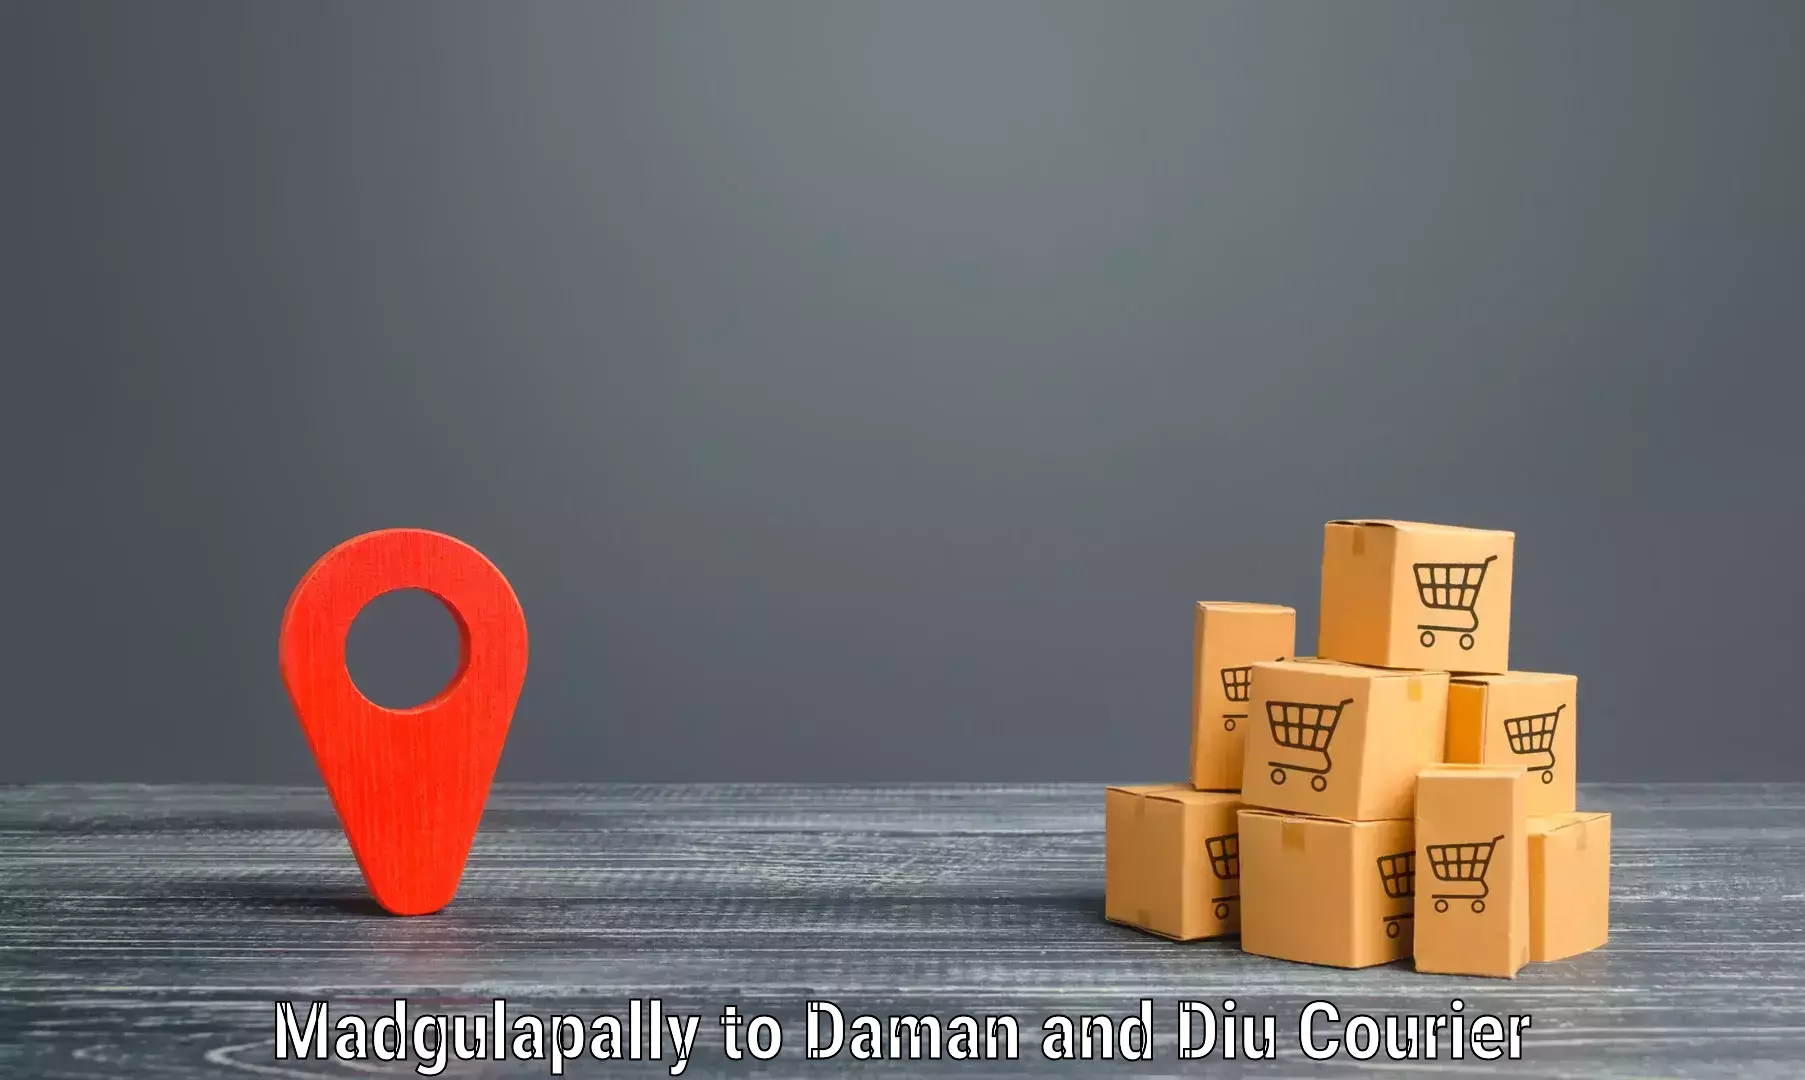 Efficient parcel tracking Madgulapally to Diu